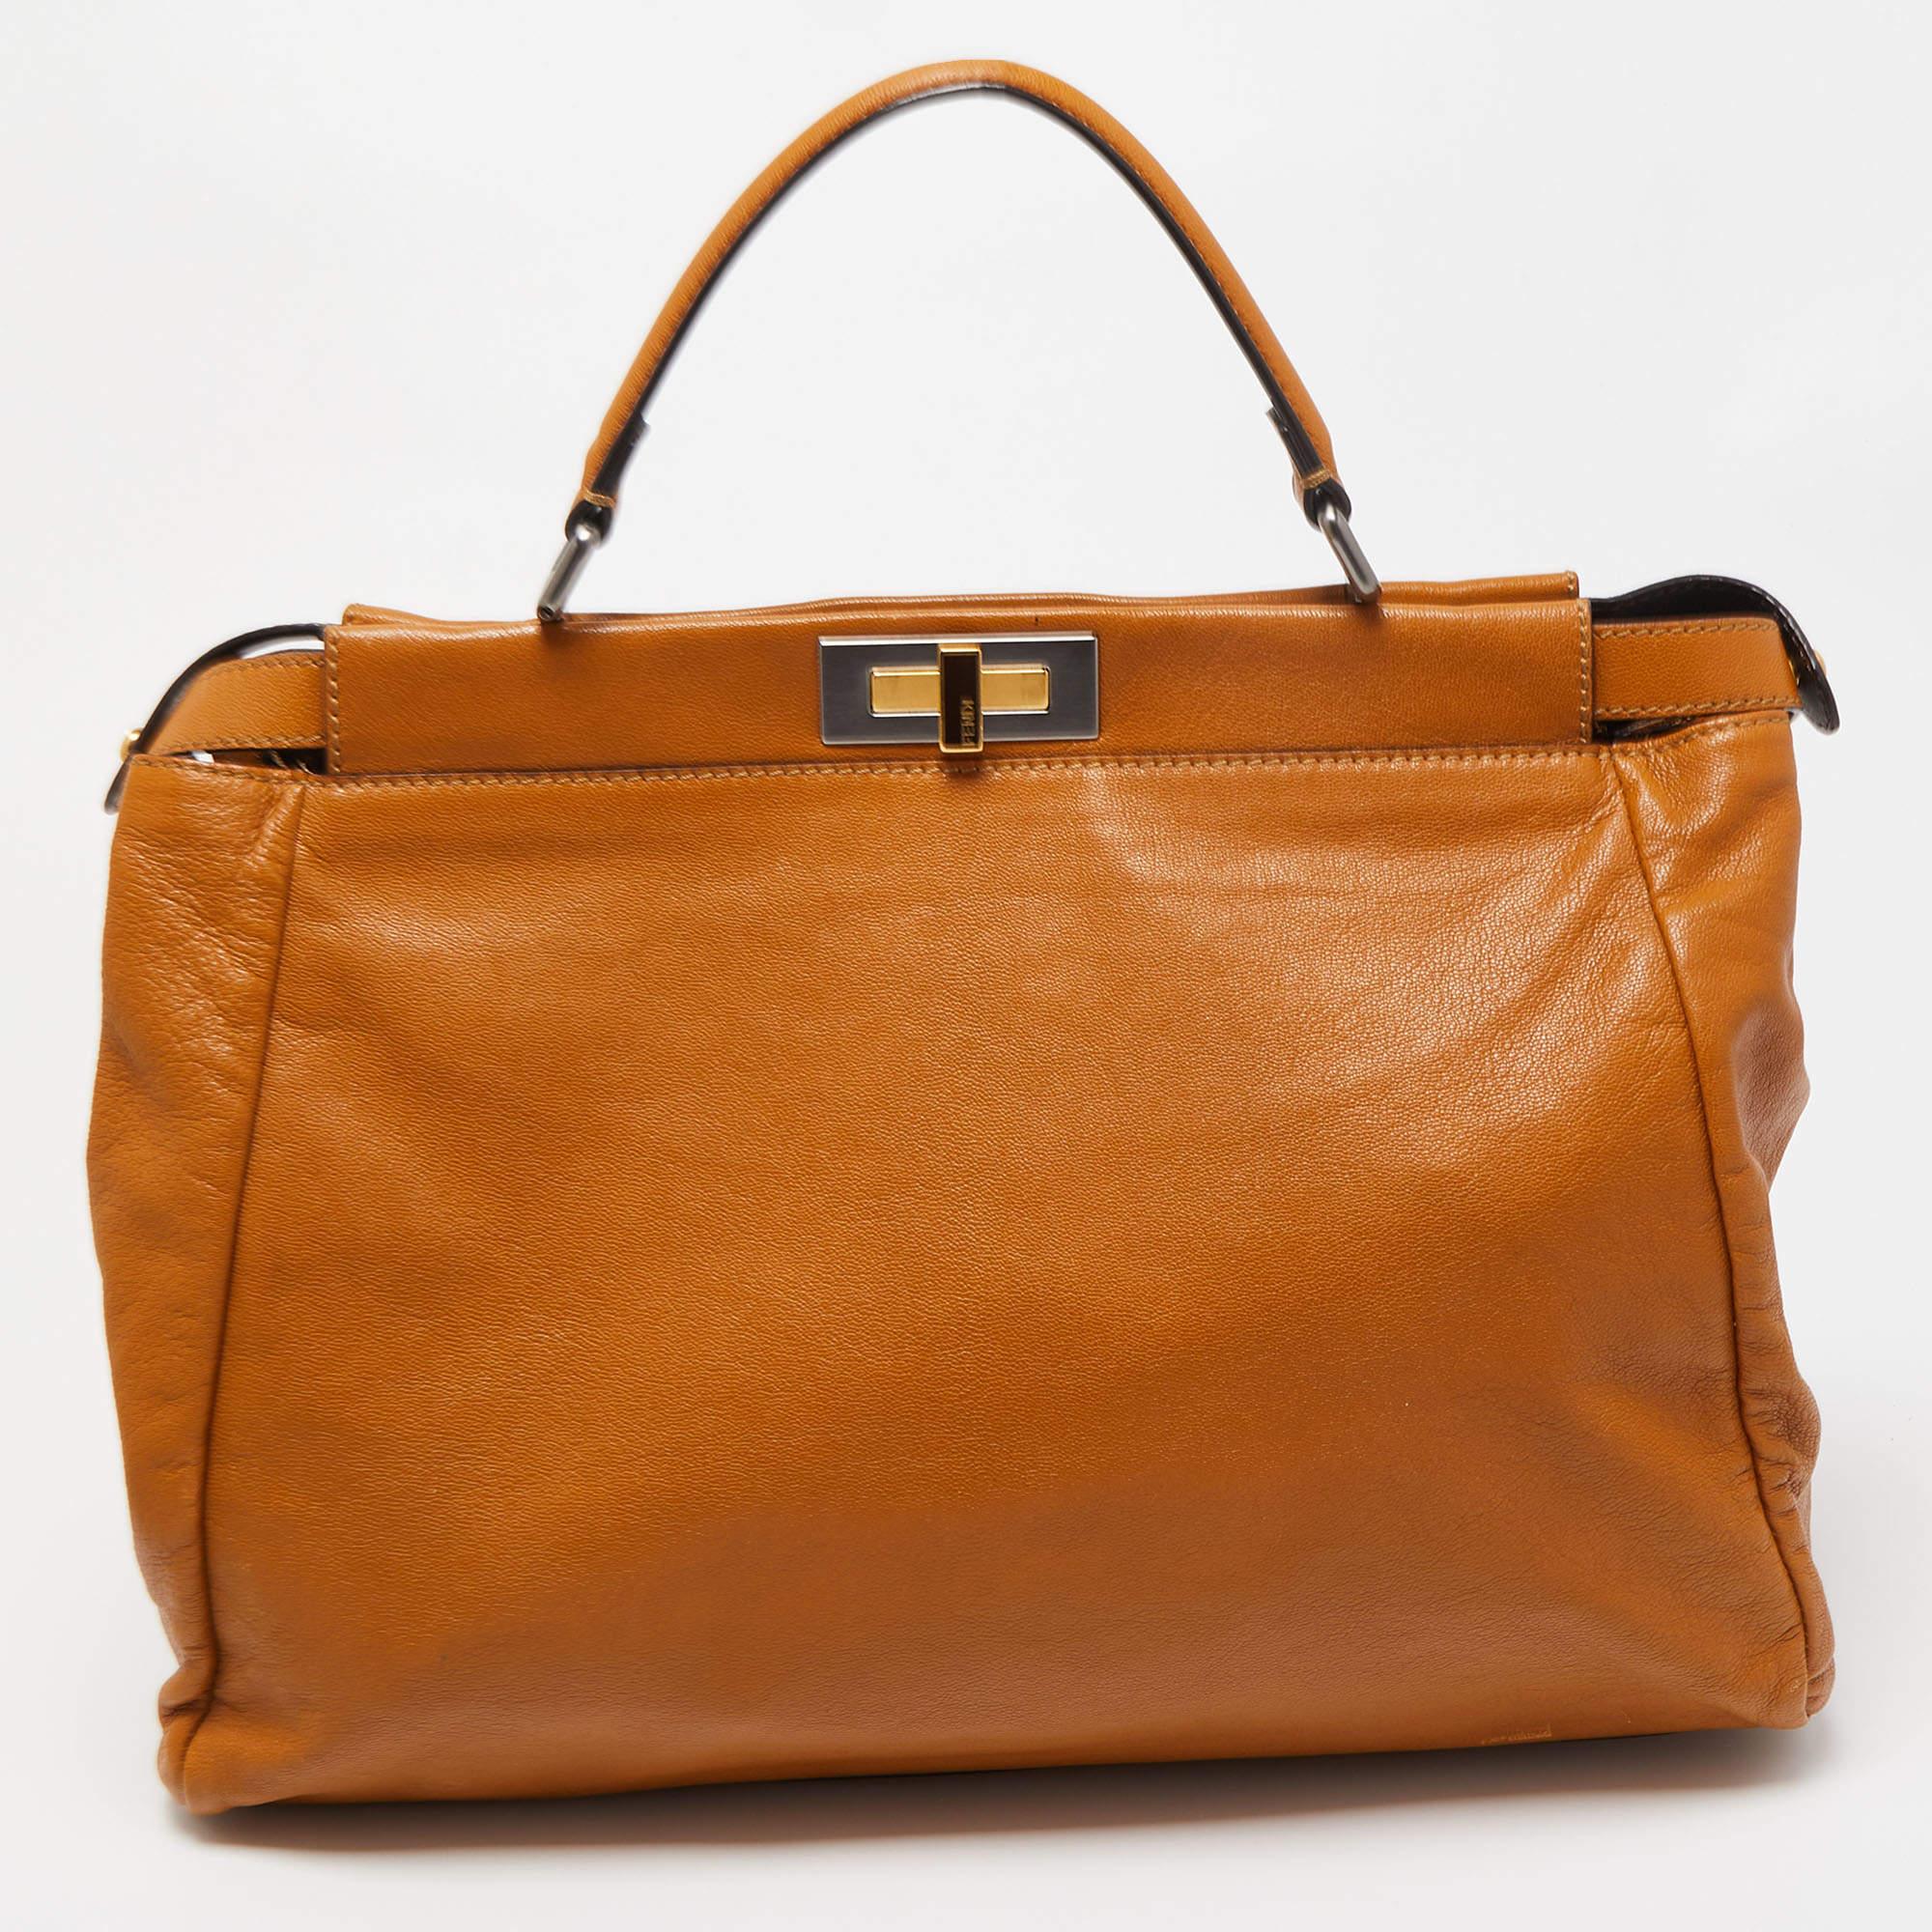 Exuding unparalleled elegance and sophistication, this bag is made from the finest material in a gorgeous hue. While the roomy interior offers ample space, the top handle allows you to carry it with much elegance.

